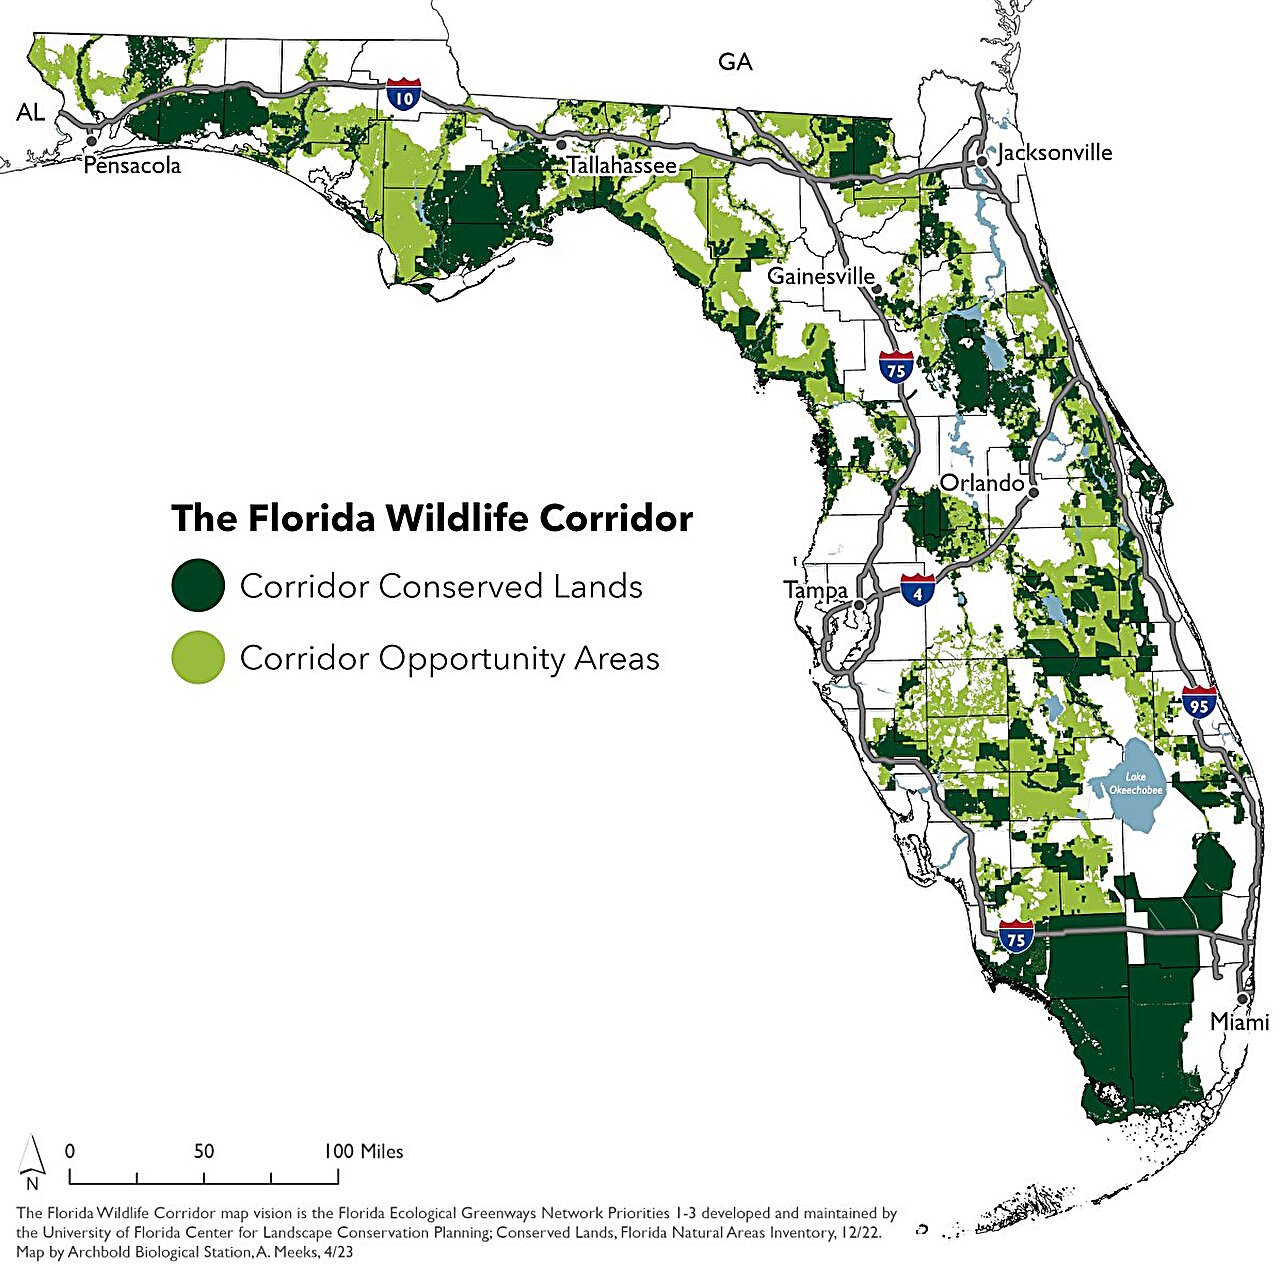 First-of-its-kind study shows Florida Wildlife Corridor eases worst impacts of climate change